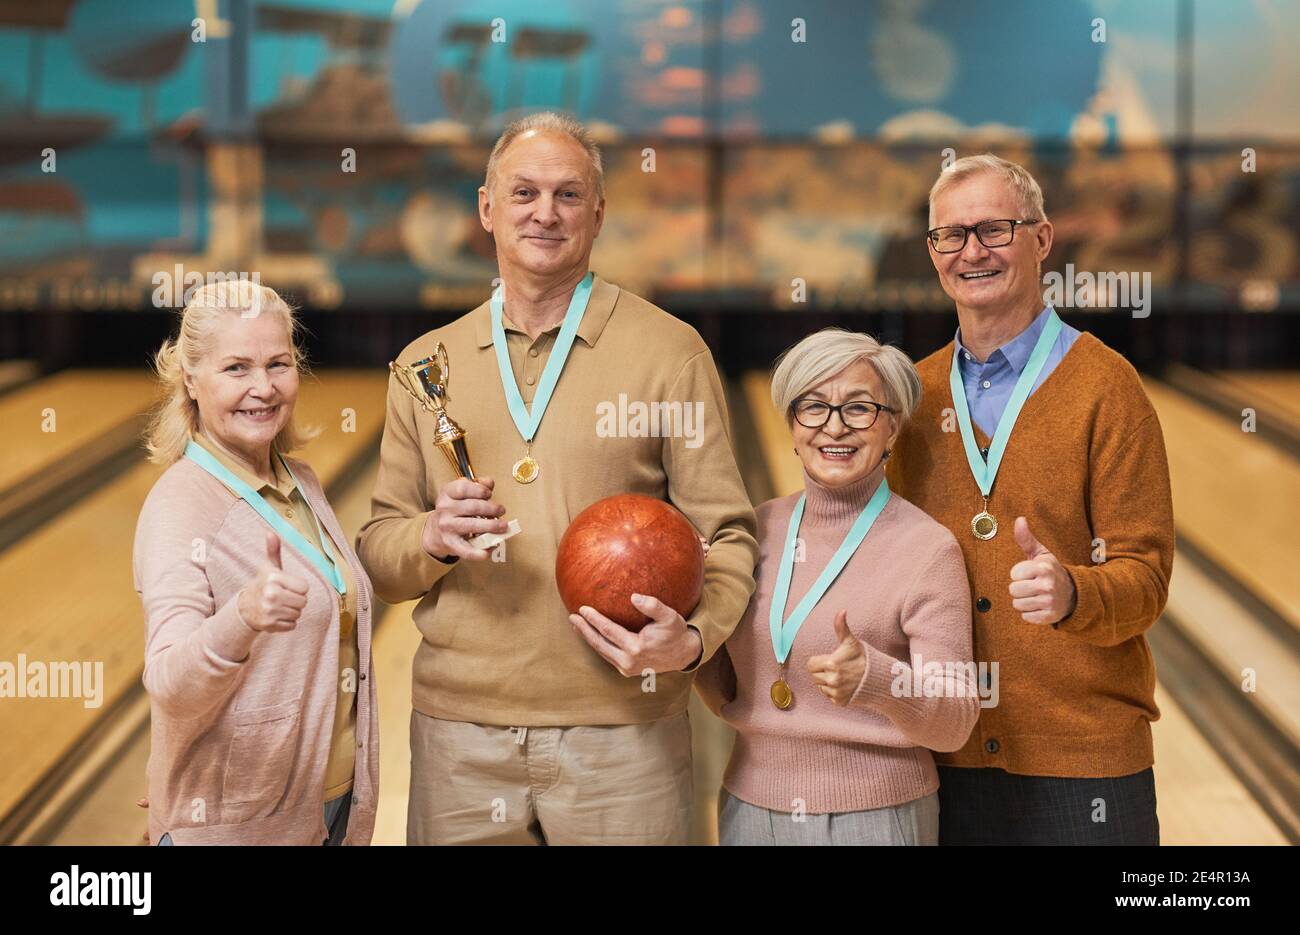 Waist up portrait of smiling senior team wearing medals holding trophy and looking at camera while standing in bowling alley after winning match Stock Photo